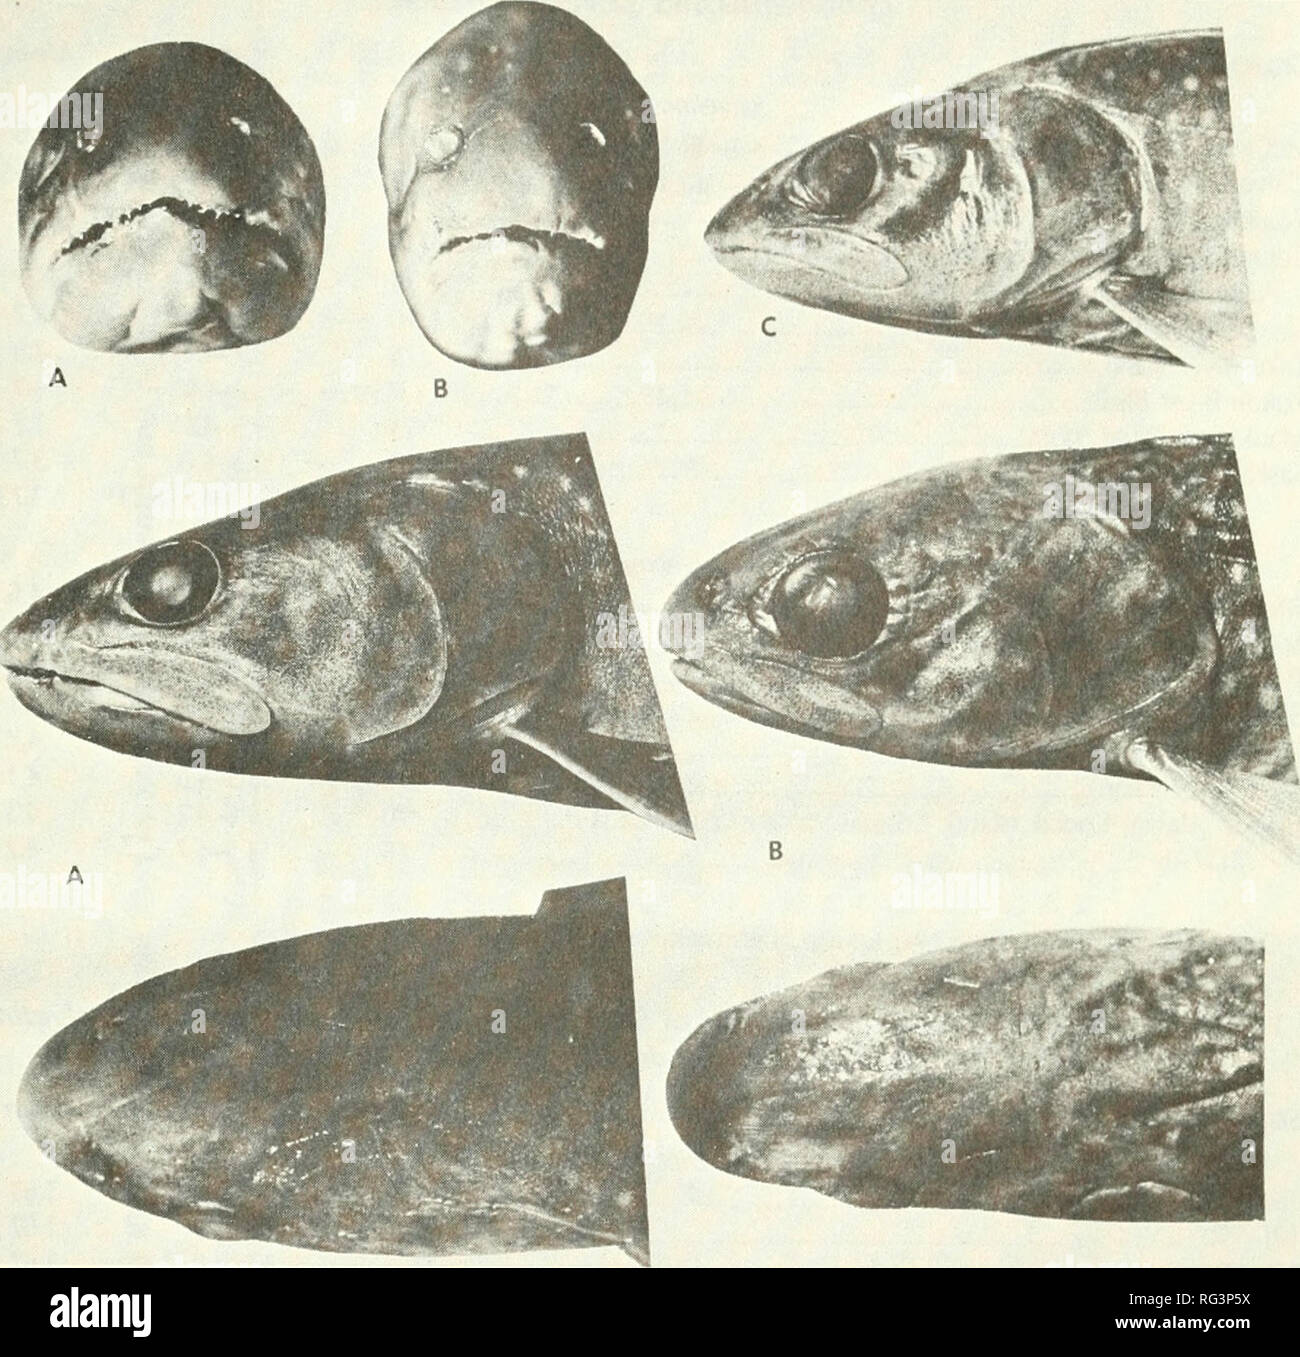 . California fish and game. Fisheries -- California; Game and game-birds -- California; Fishes -- California; Animal Population Groups; Pêches; Gibier; Poissons. TAXONOMY AND DISTRIBUTION OF THE BULL TROUT 151. FIGURE 4. Head form in juveniles of (A) Salvelinus confluentus, OSUM 25212, 235 mm, female, trib. of S. Fork Flathead R., Montana, (frontal, lateral, dorsal views); (B) Salvelinus malma, OSUM 25213, 138 mm, female, trib. Karluk R., Kodiak I., Alaska, (frontal, lateral, dorsal views); (C) Salvelinus confluentus UMMZ 188857, 134 mm, male, trib. of Clearwater R., Montana (lateral view). Ph Stock Photo